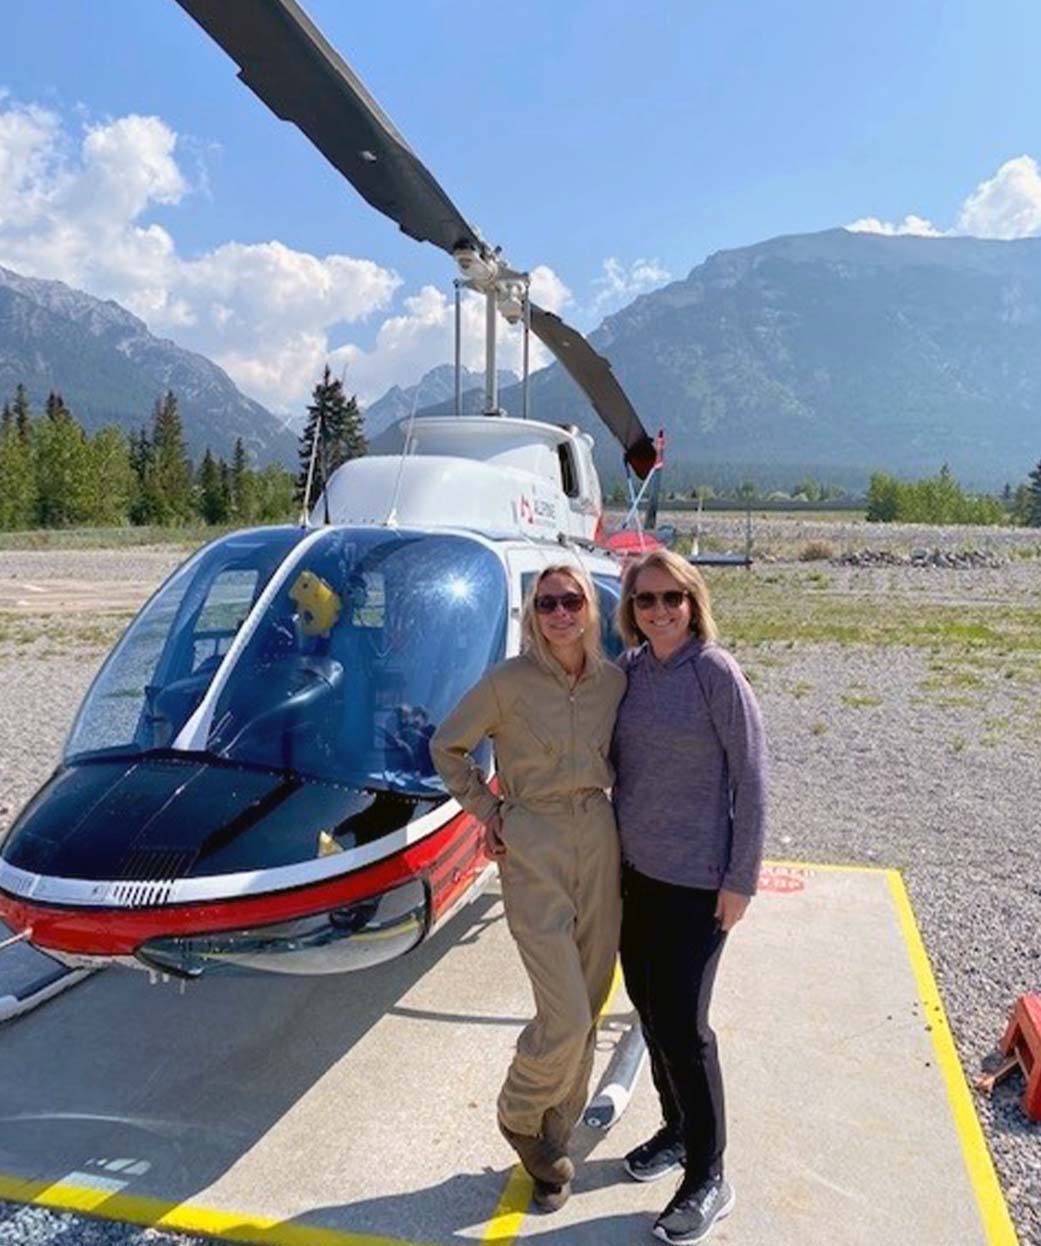 Dr. Madsen on a helicopter tour in Canada with a 24-year old female pilot. Walking the walk everywhere she goes.